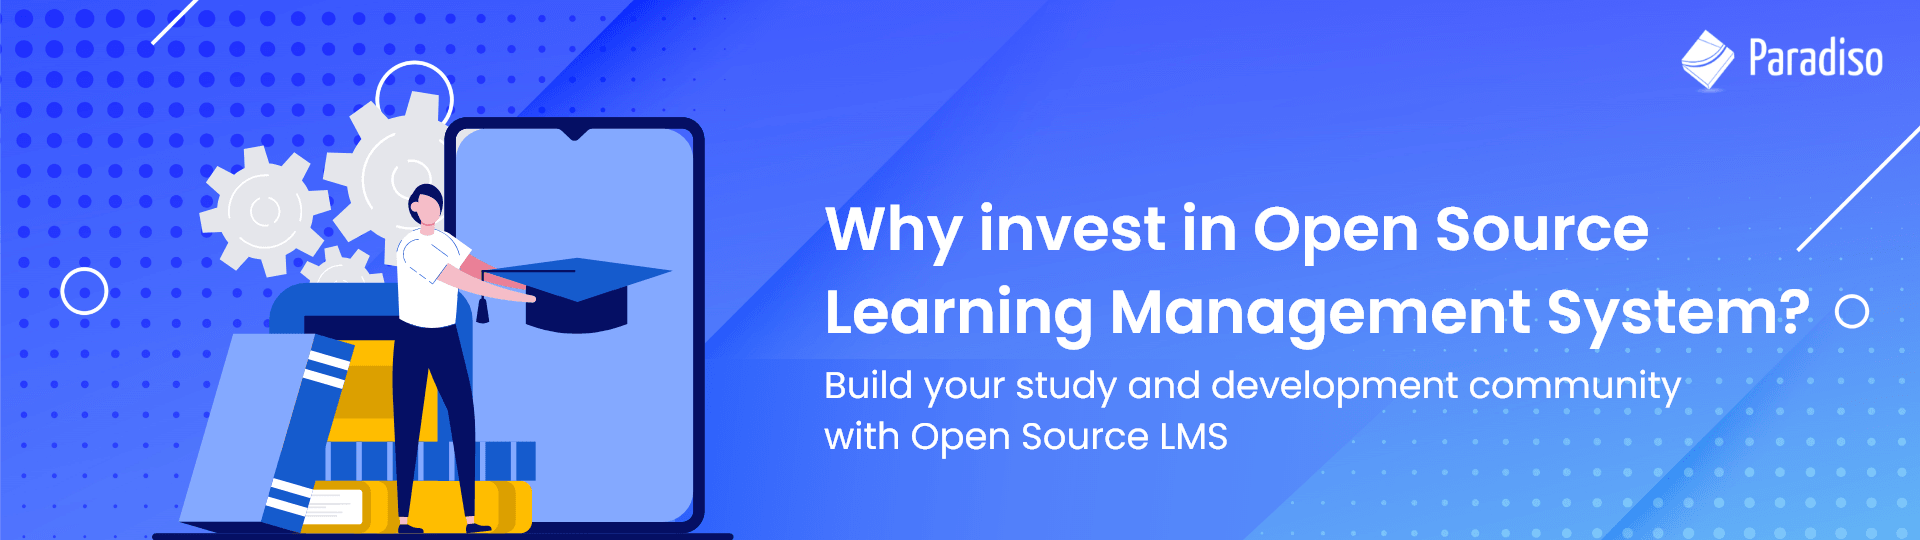 Open Source LMS